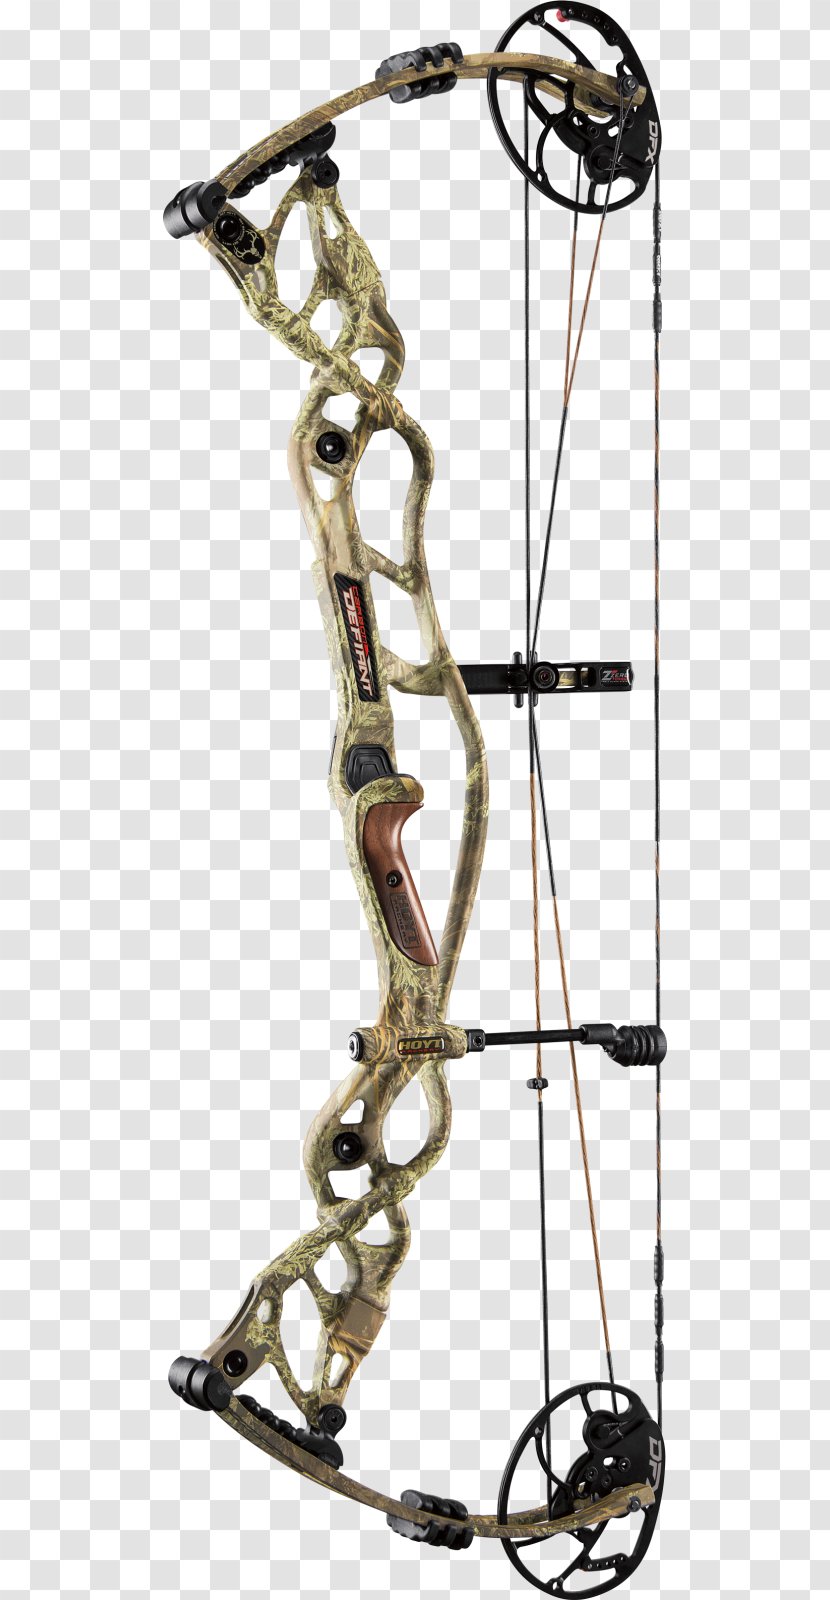 Compound Bows Cam Archery Bowhunting Bow And Arrow - Turbocompound Engine Transparent PNG